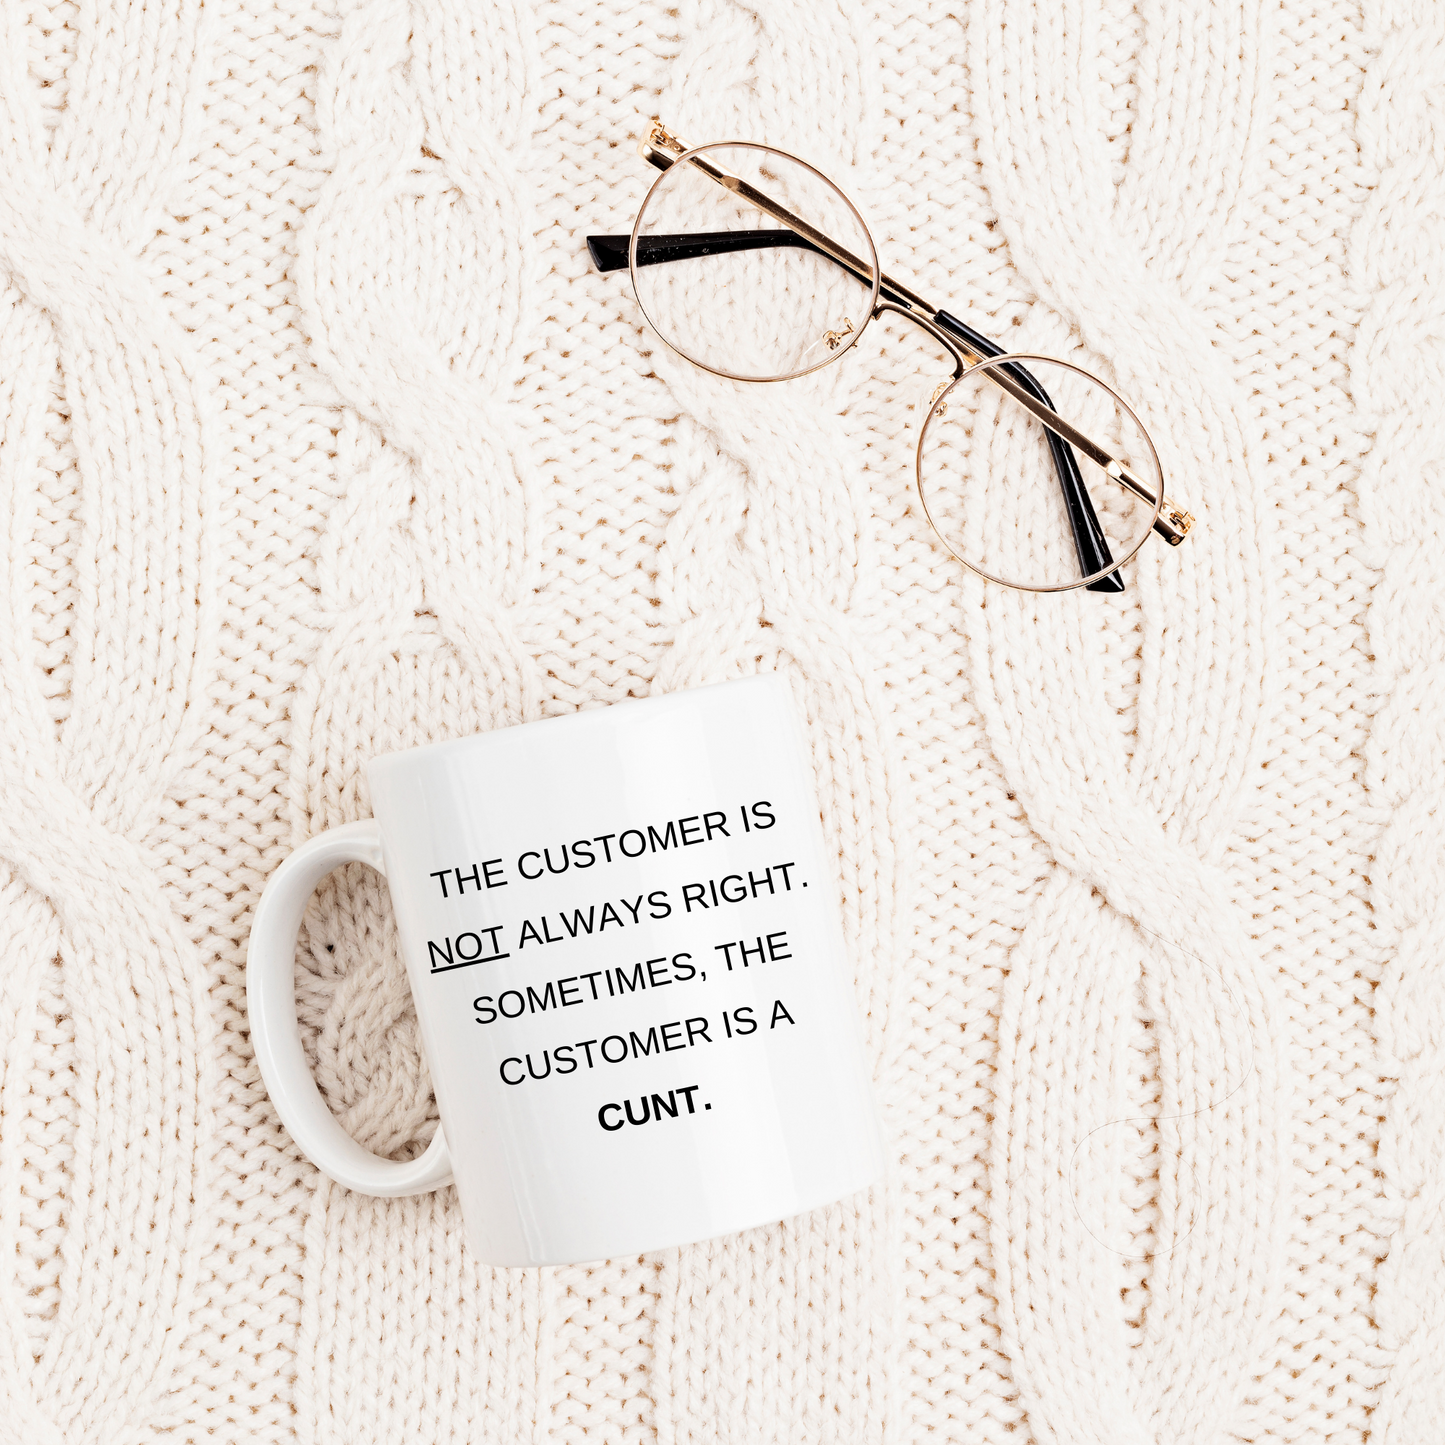 The Customer is Not Always Right Funny Mug